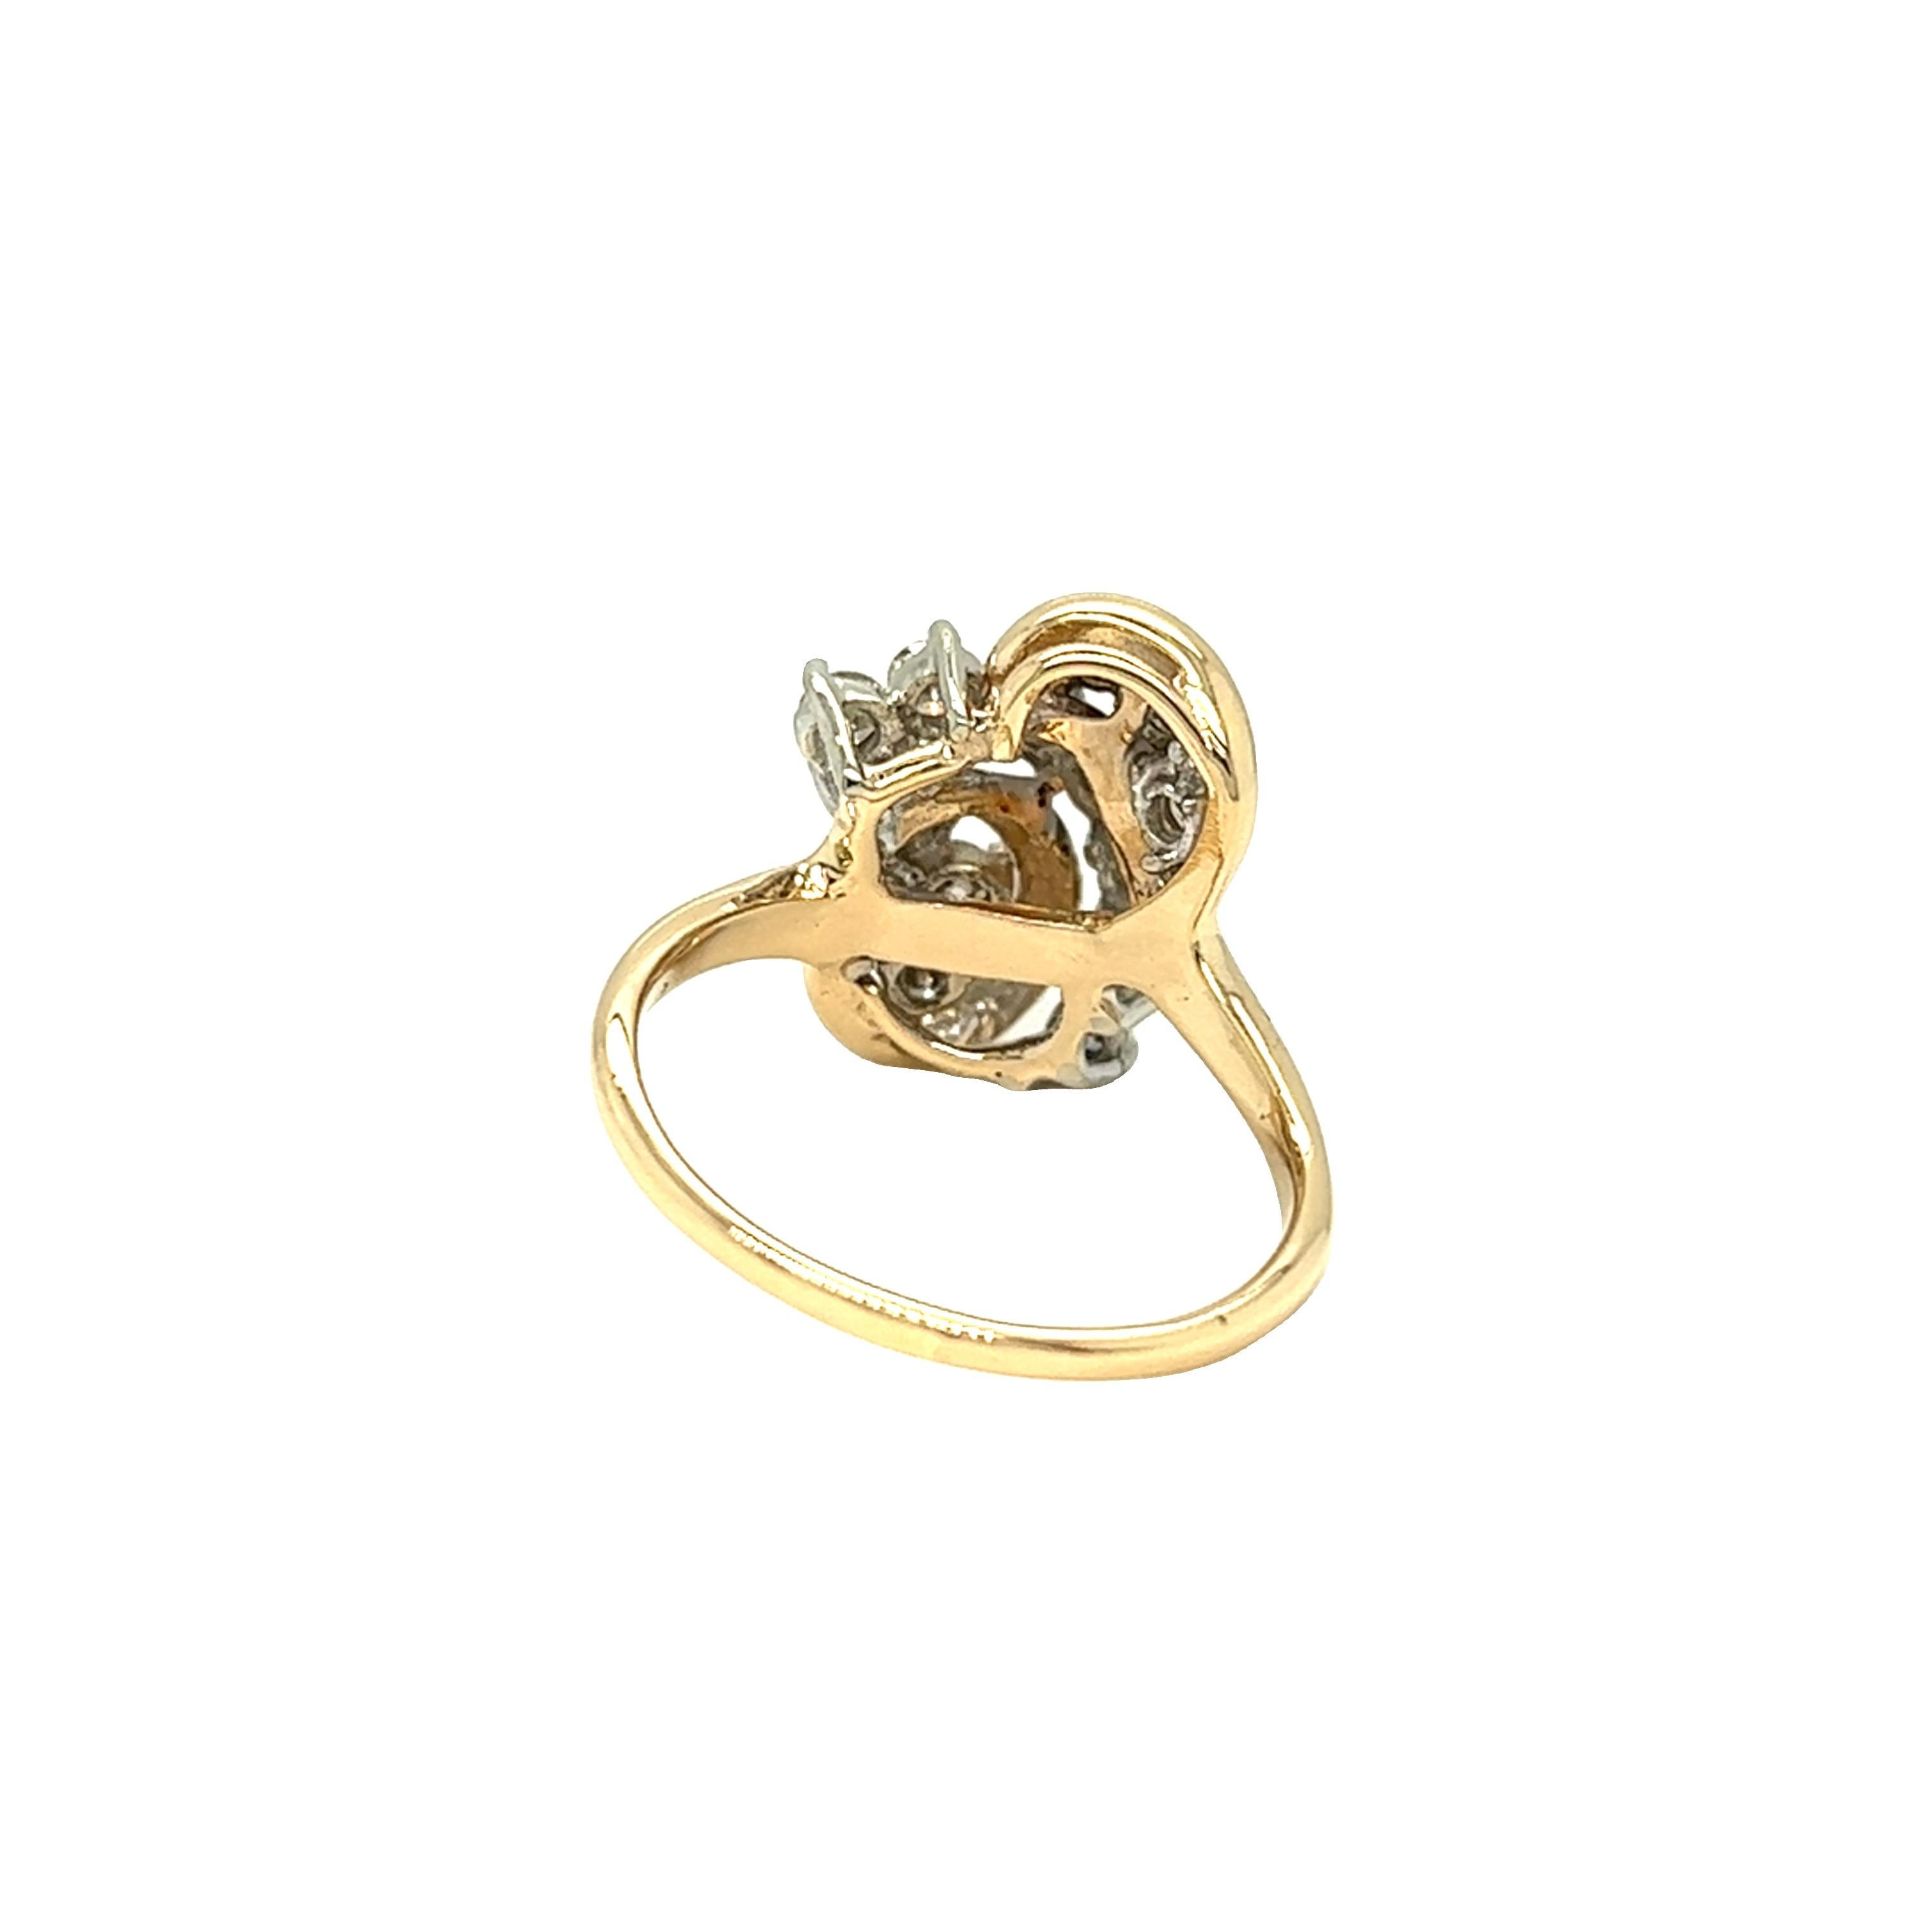 Round Cut Vintage Swirl Cluster Diamond Ring 14k White and Yellow Gold For Sale